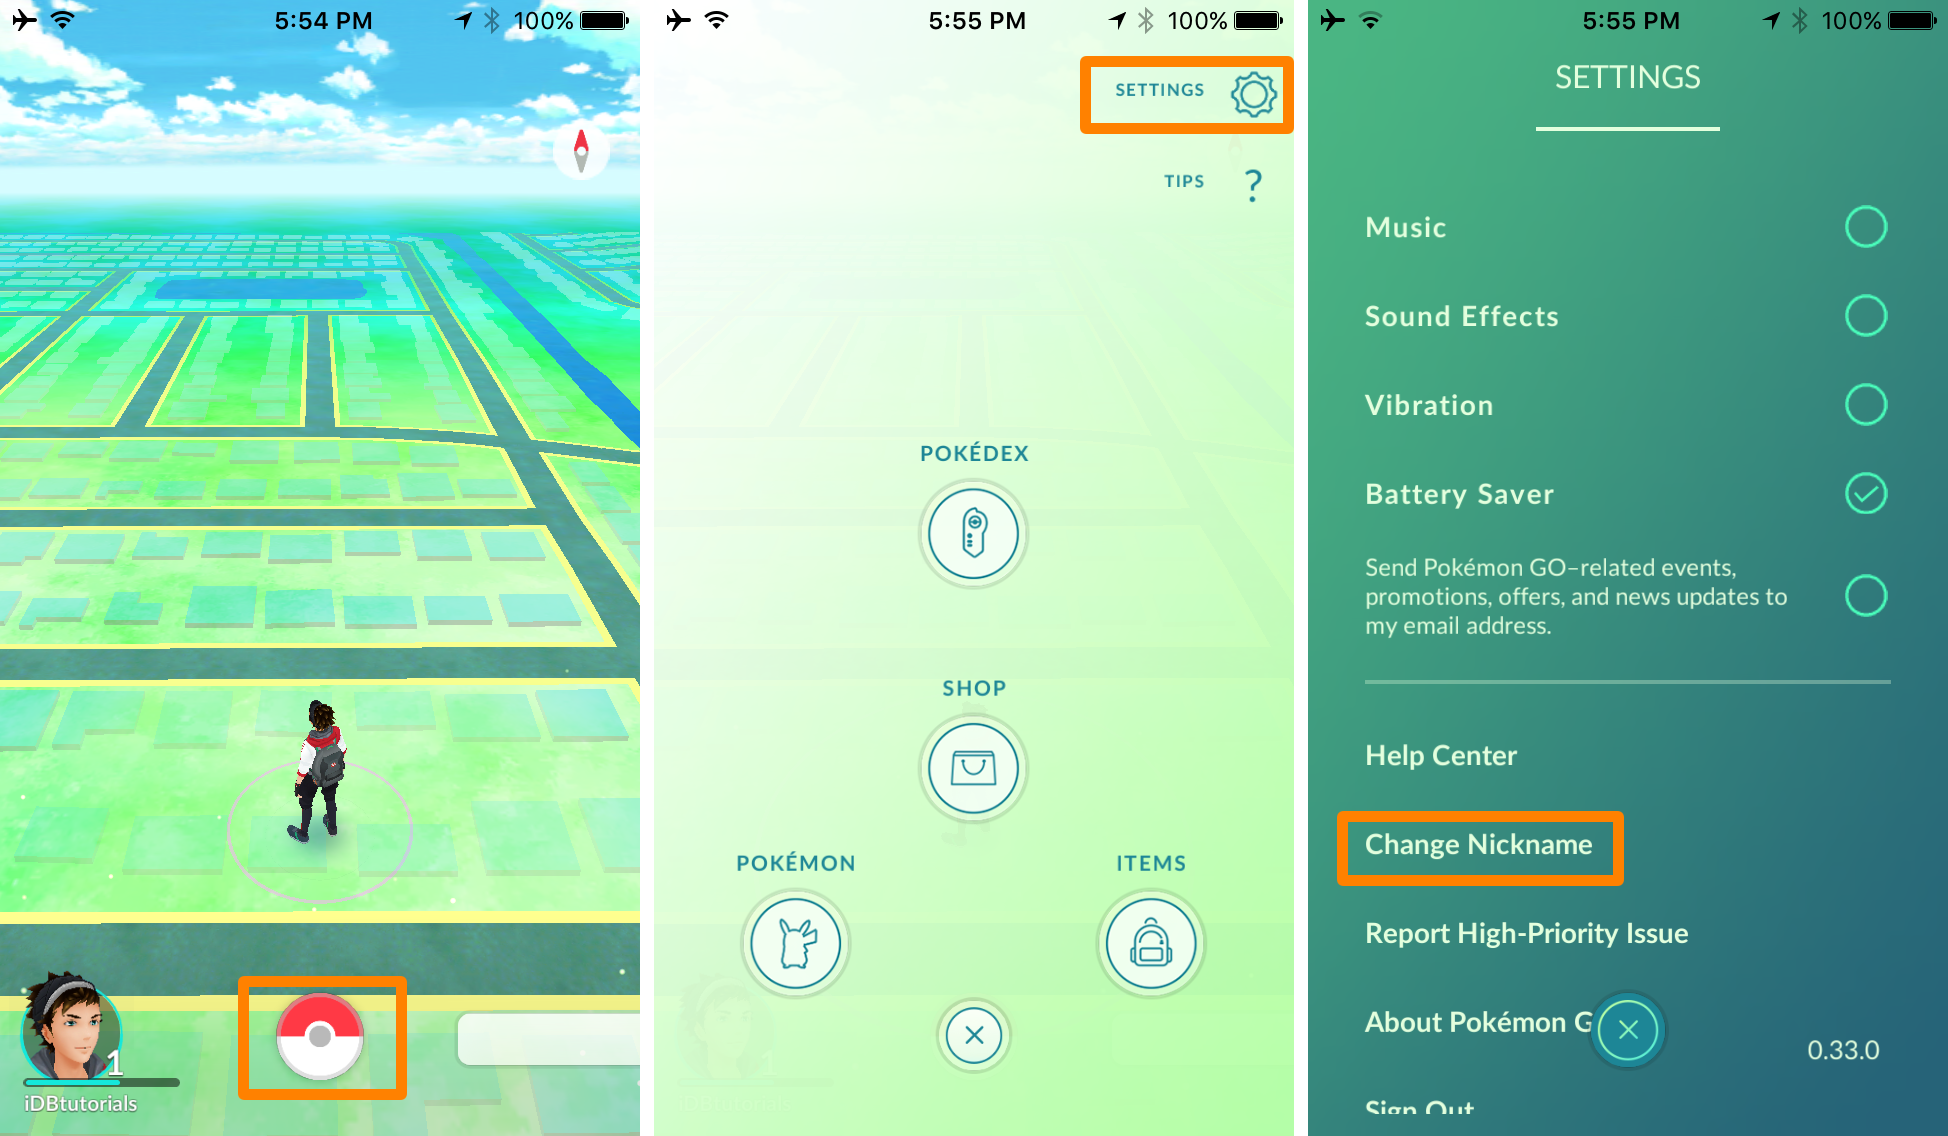 How to change your player name in Pokémon GO